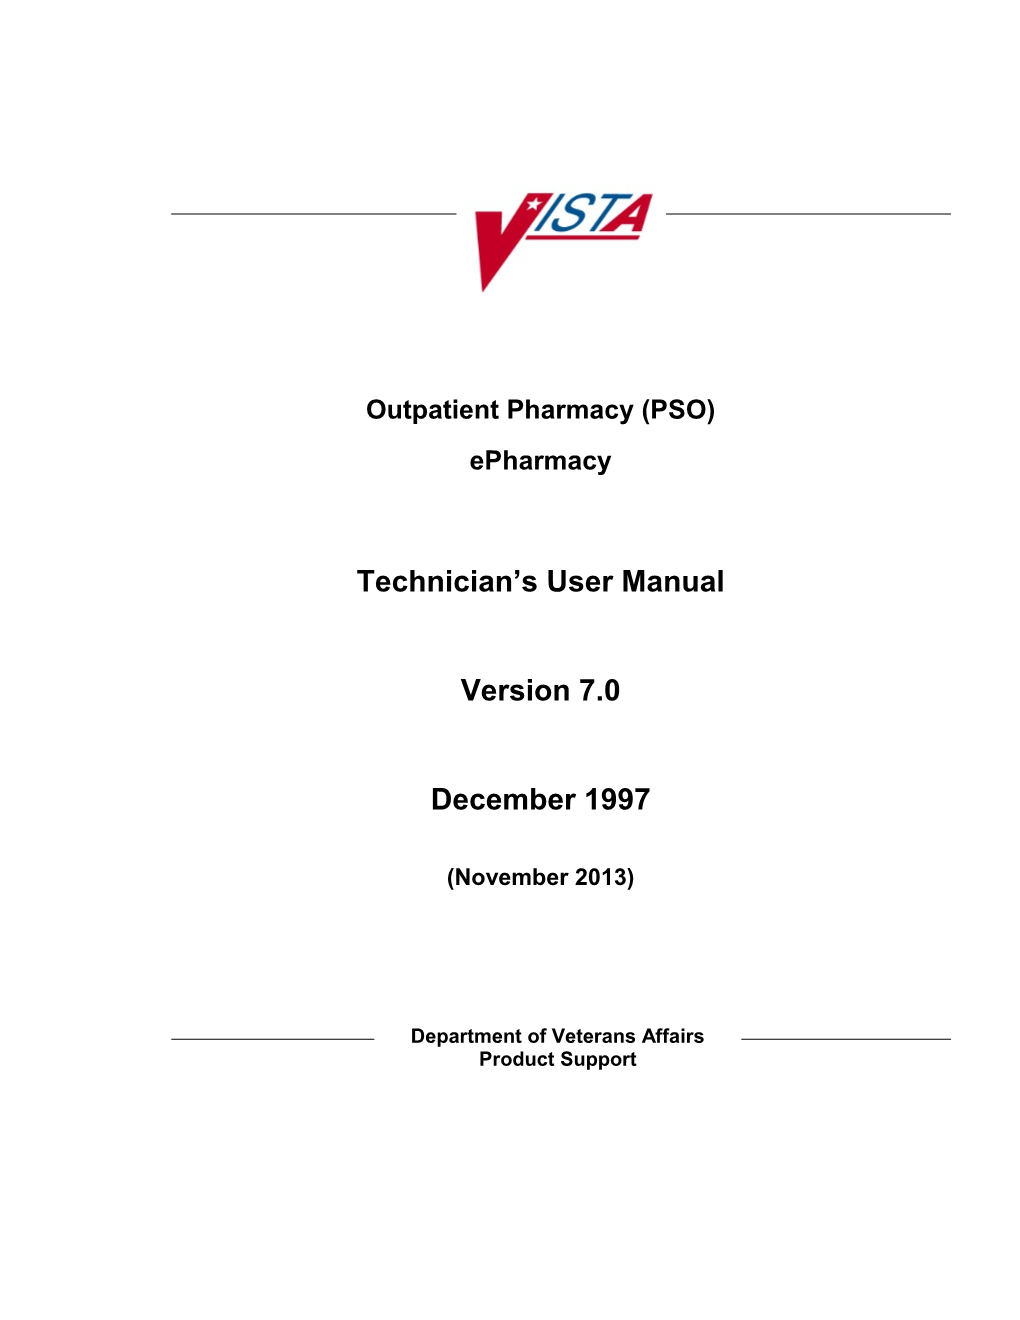 Department of Veterans Affairs Outpatient Pharmacy Technician's User Manual V. 7.0